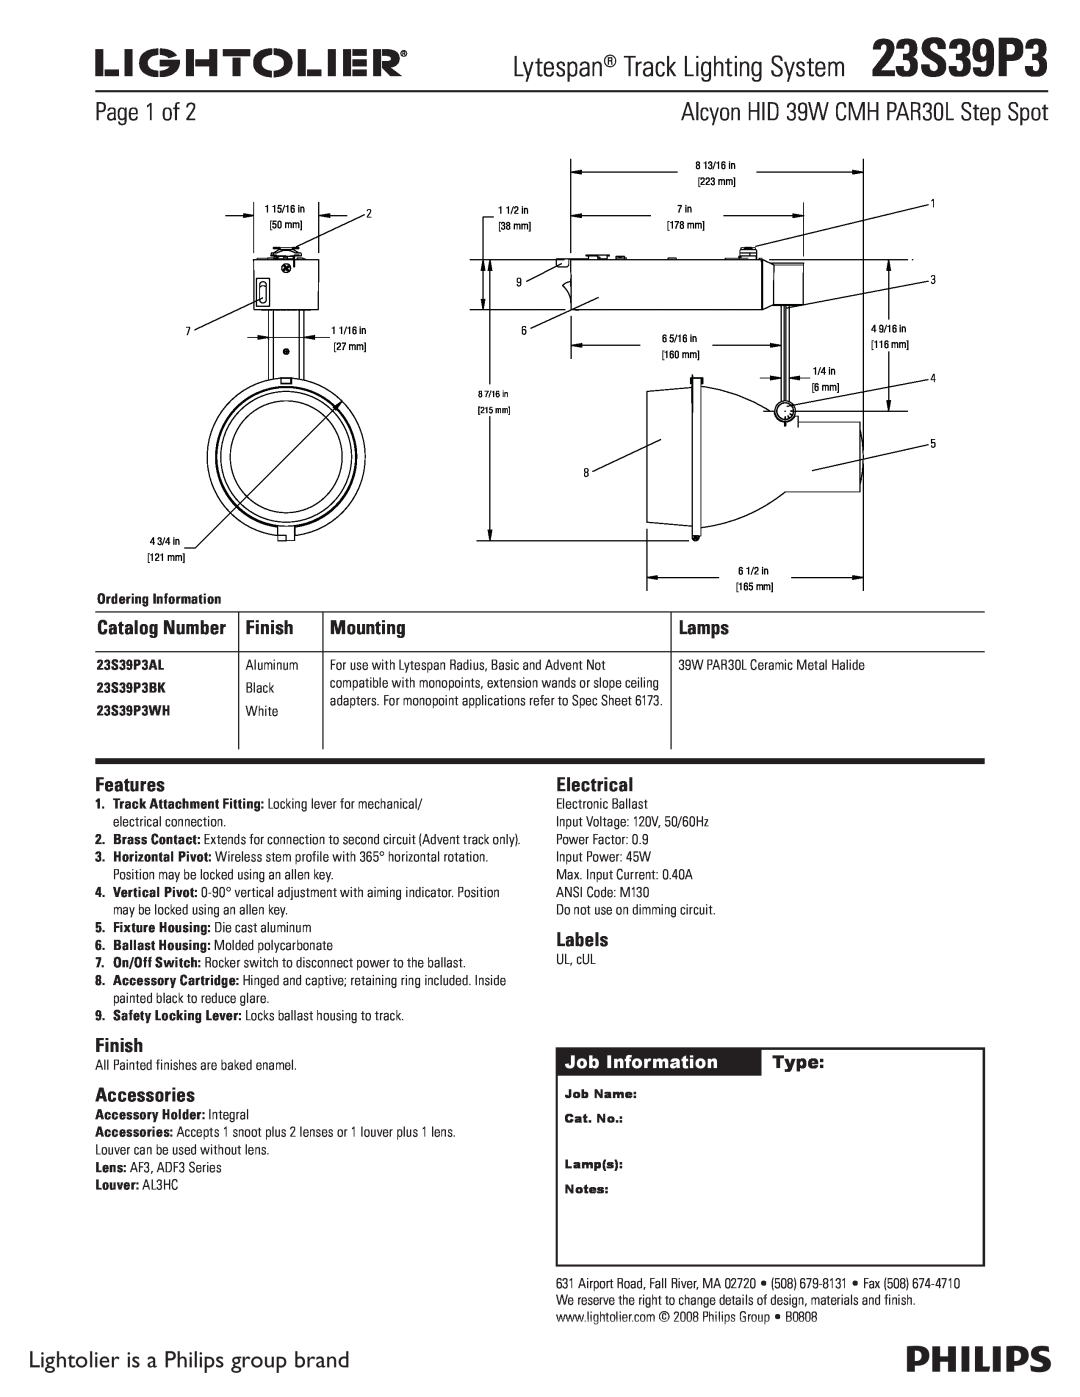 Lightolier manual Lytespan Track Lighting System23S39P3, Lightolier is a Philips group brand, Finish, Mounting, Lamps 